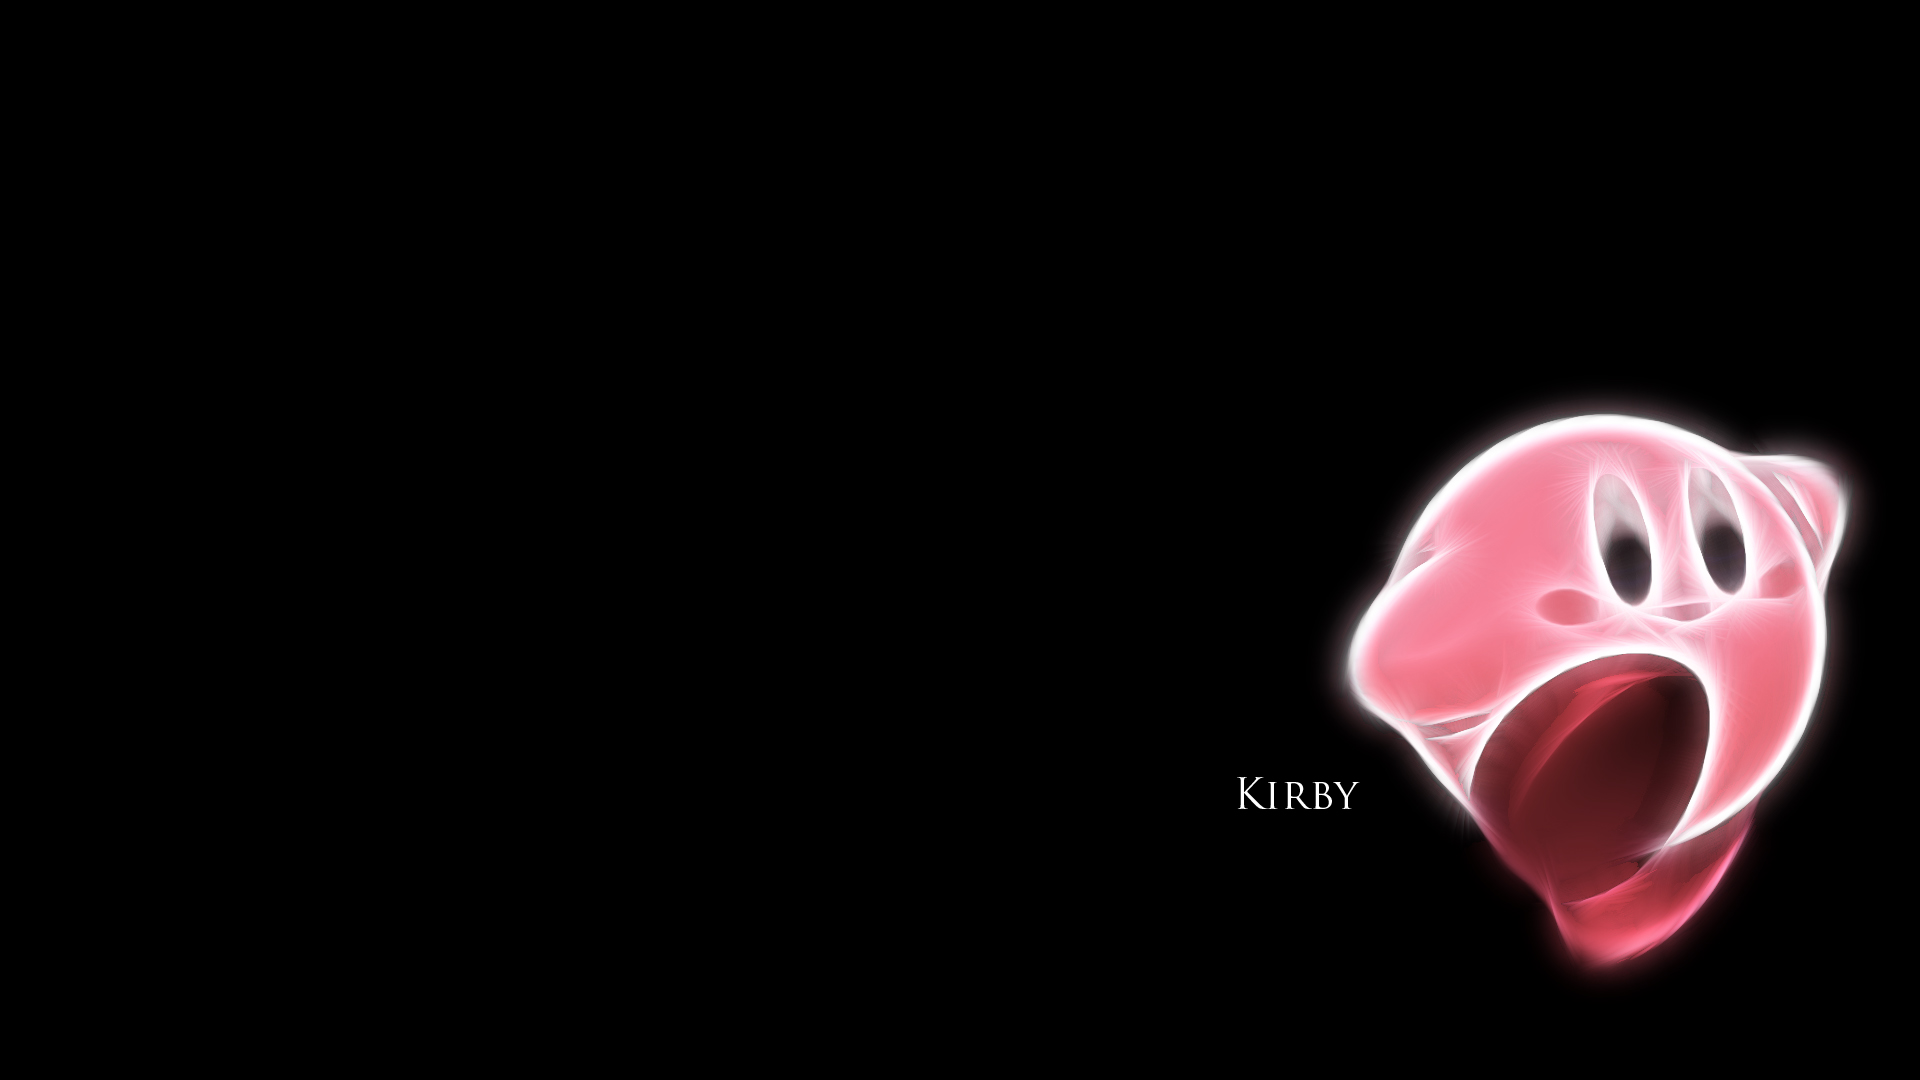 Free download Kirby HD Wallpaper and Background Image stmednet [1920x1080] for your Desktop, Mobile & Tablet. Explore Kirby Background. Kirby Wallpaper, Kirby Background, Jack Kirby Wallpaper